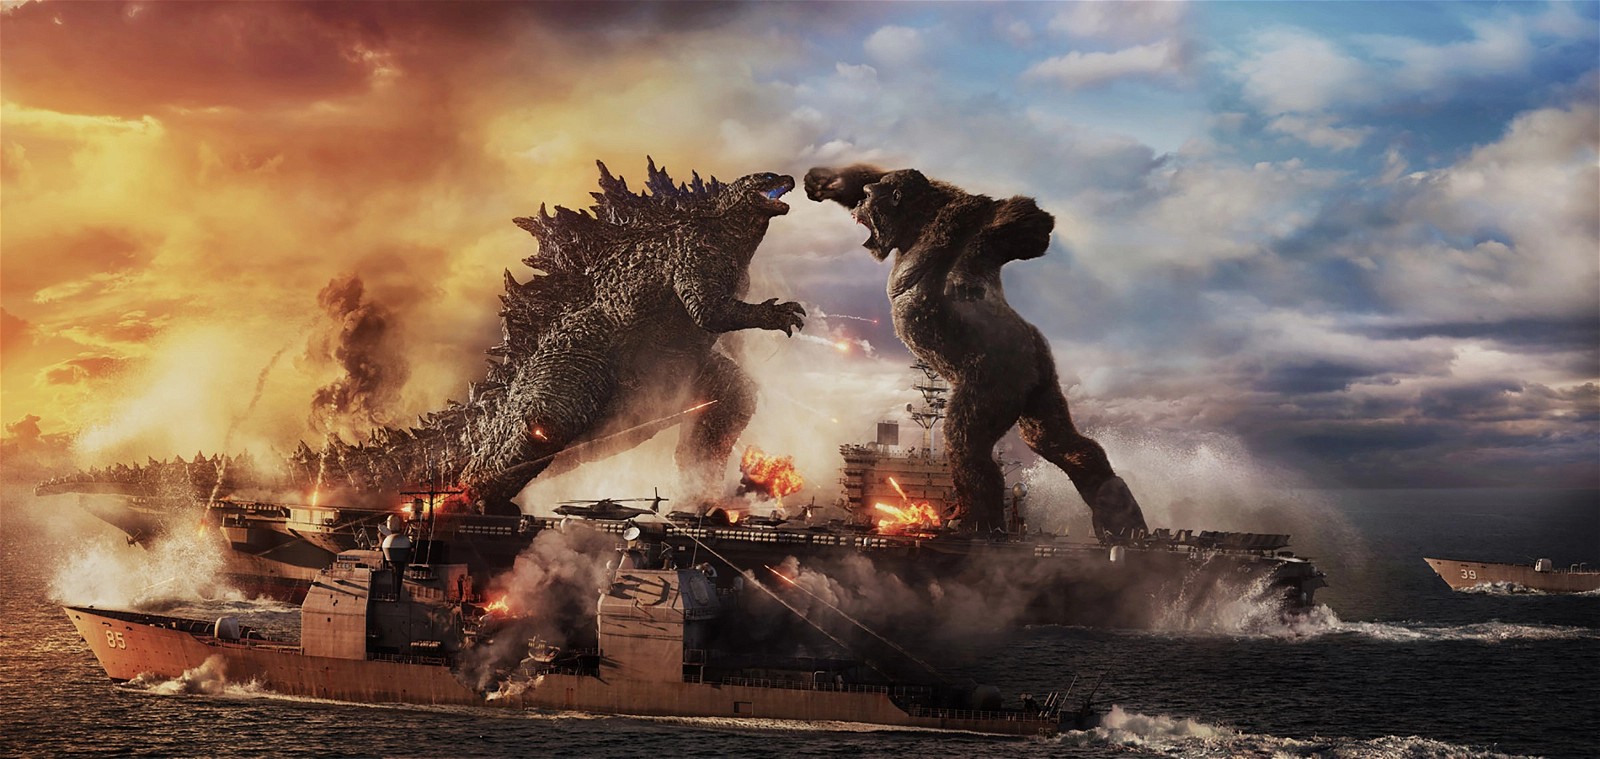 Godzilla v Kong sequel is in the works at Legendary